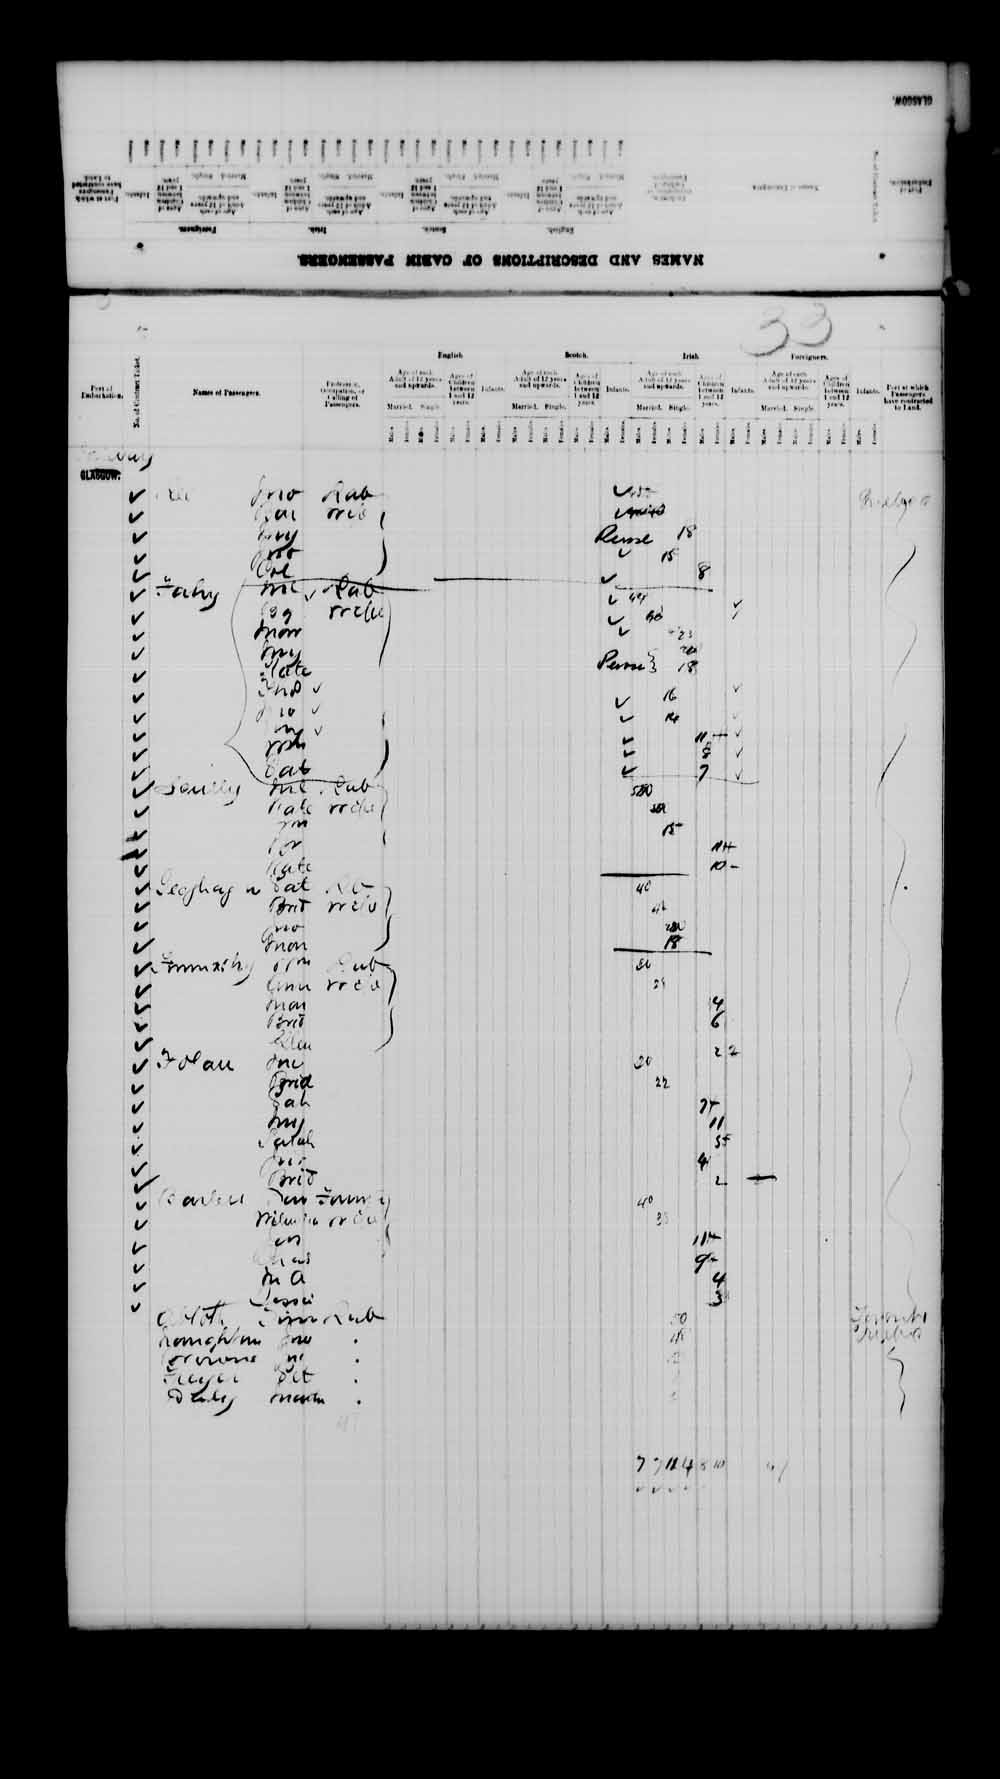 Digitized page of Passenger Lists for Image No.: e003543104